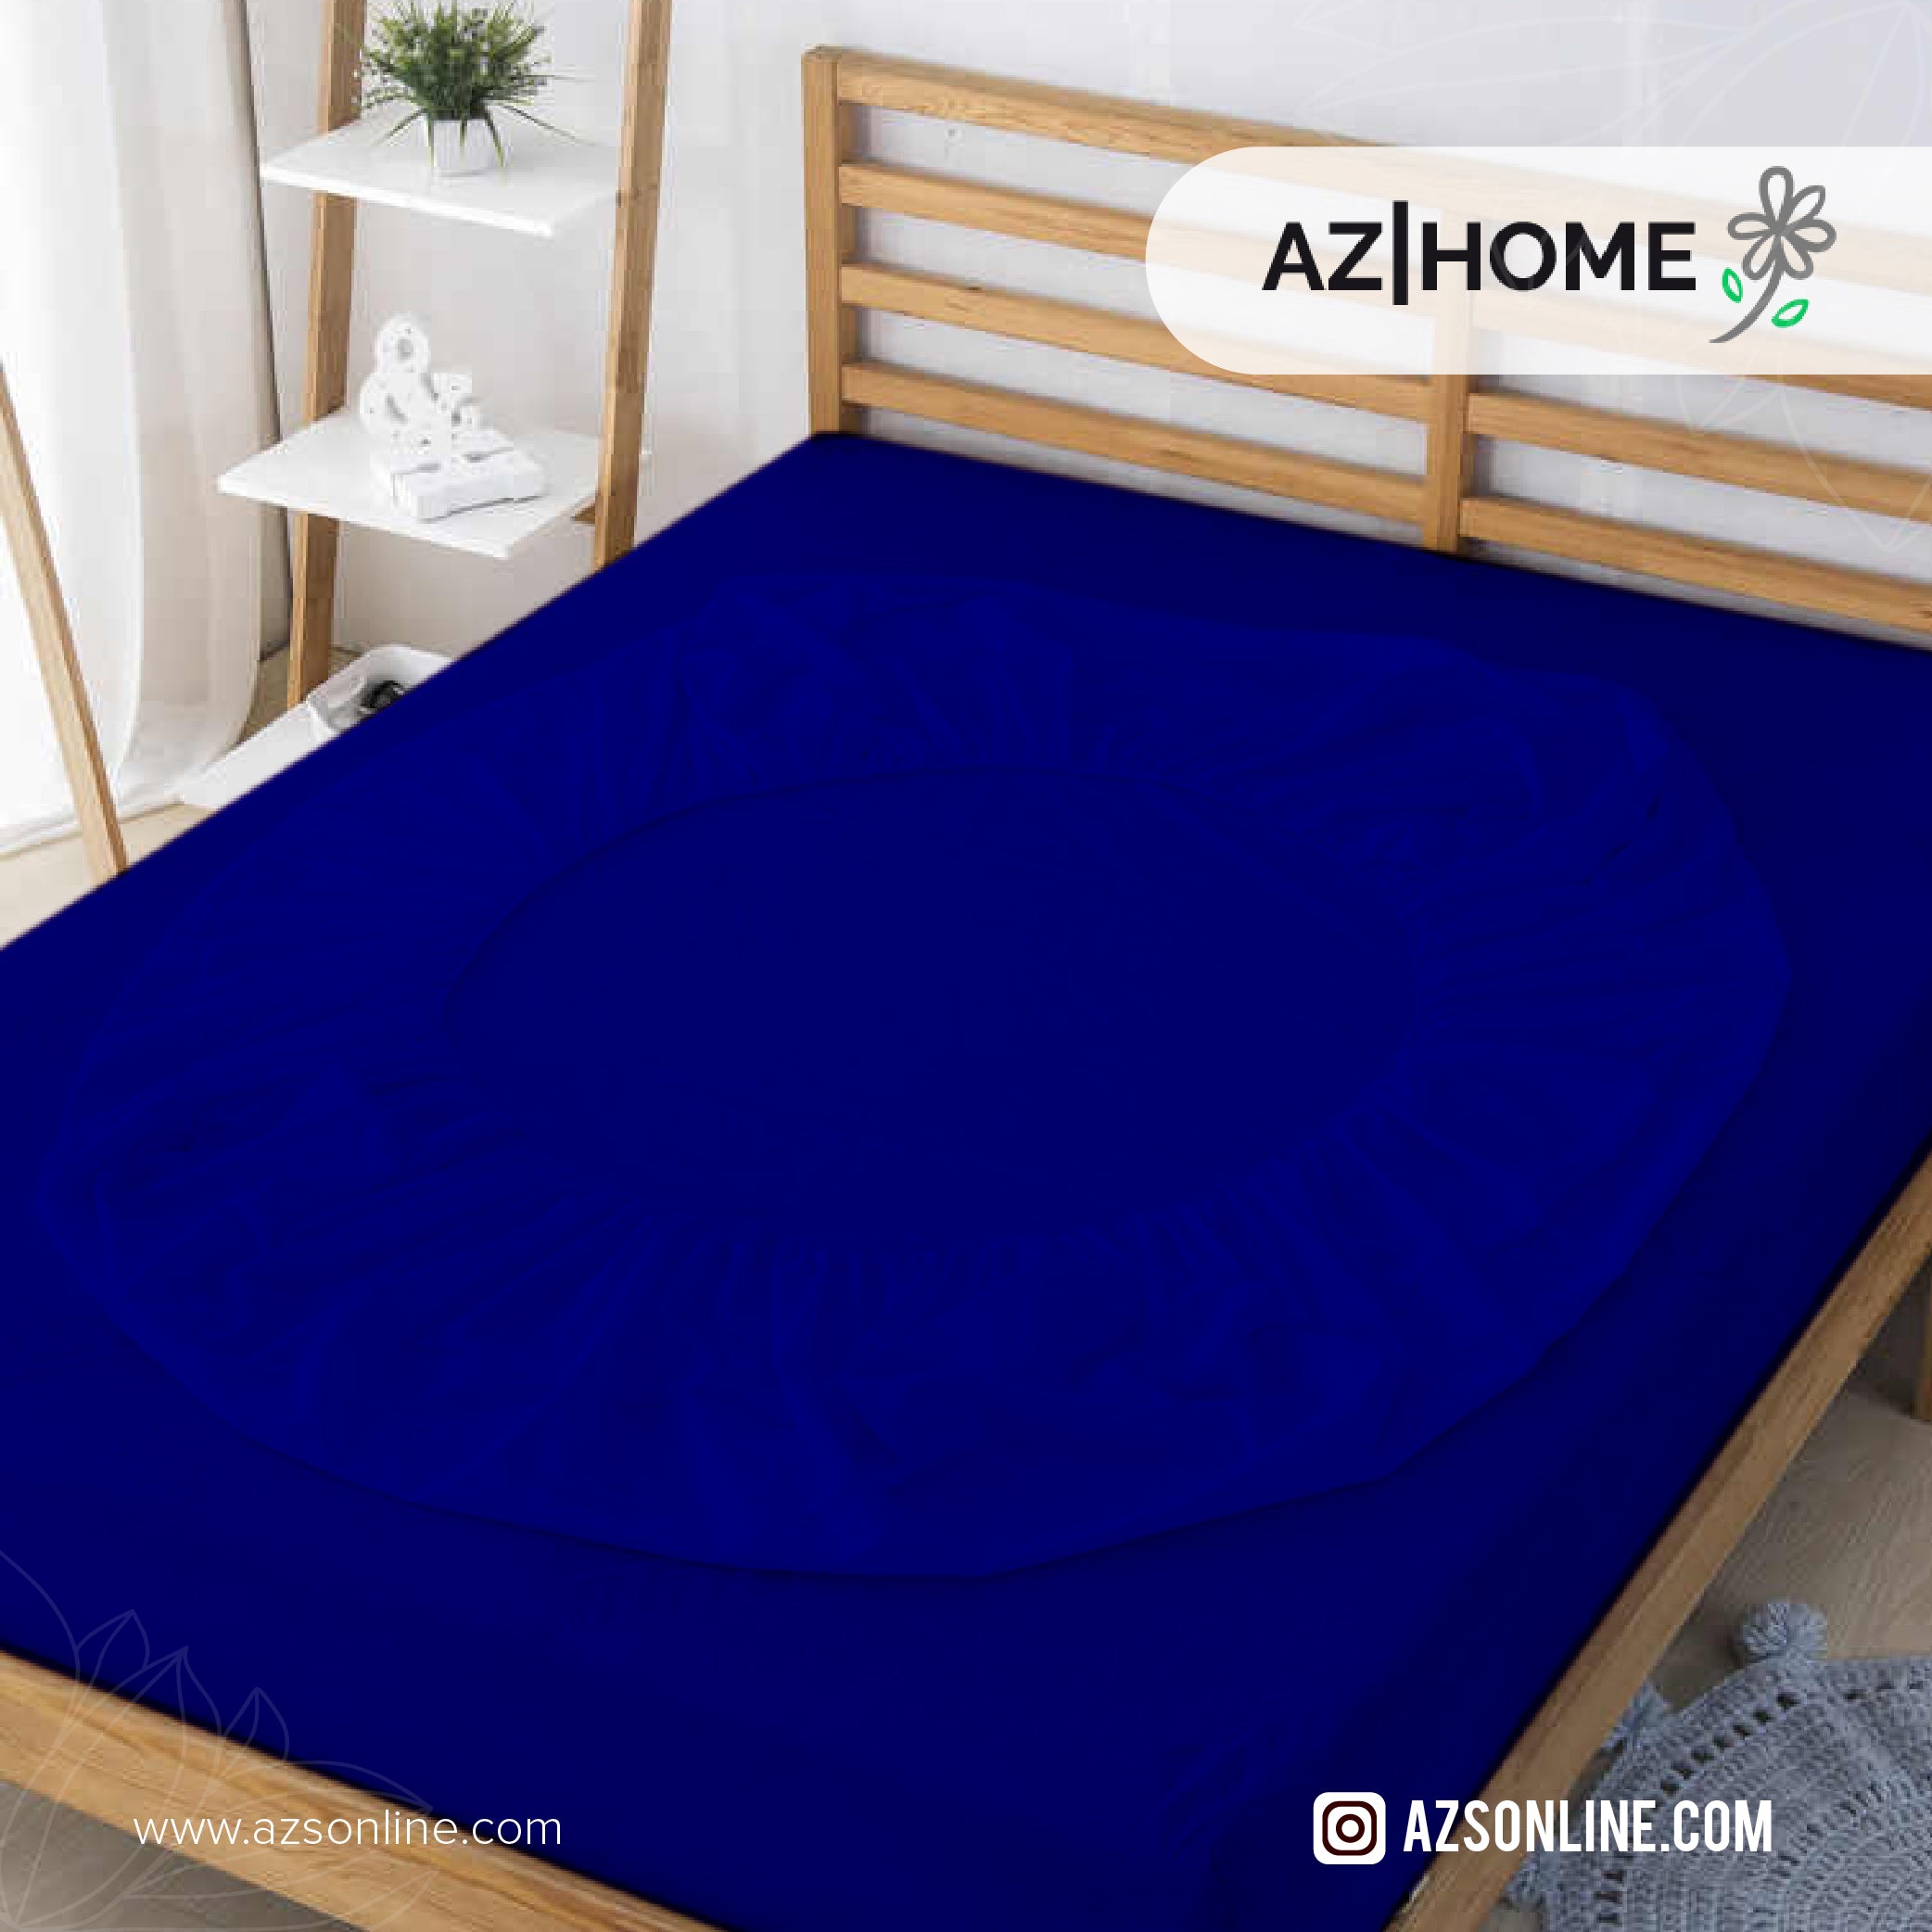 Water Proof Mattress Protector - Blue